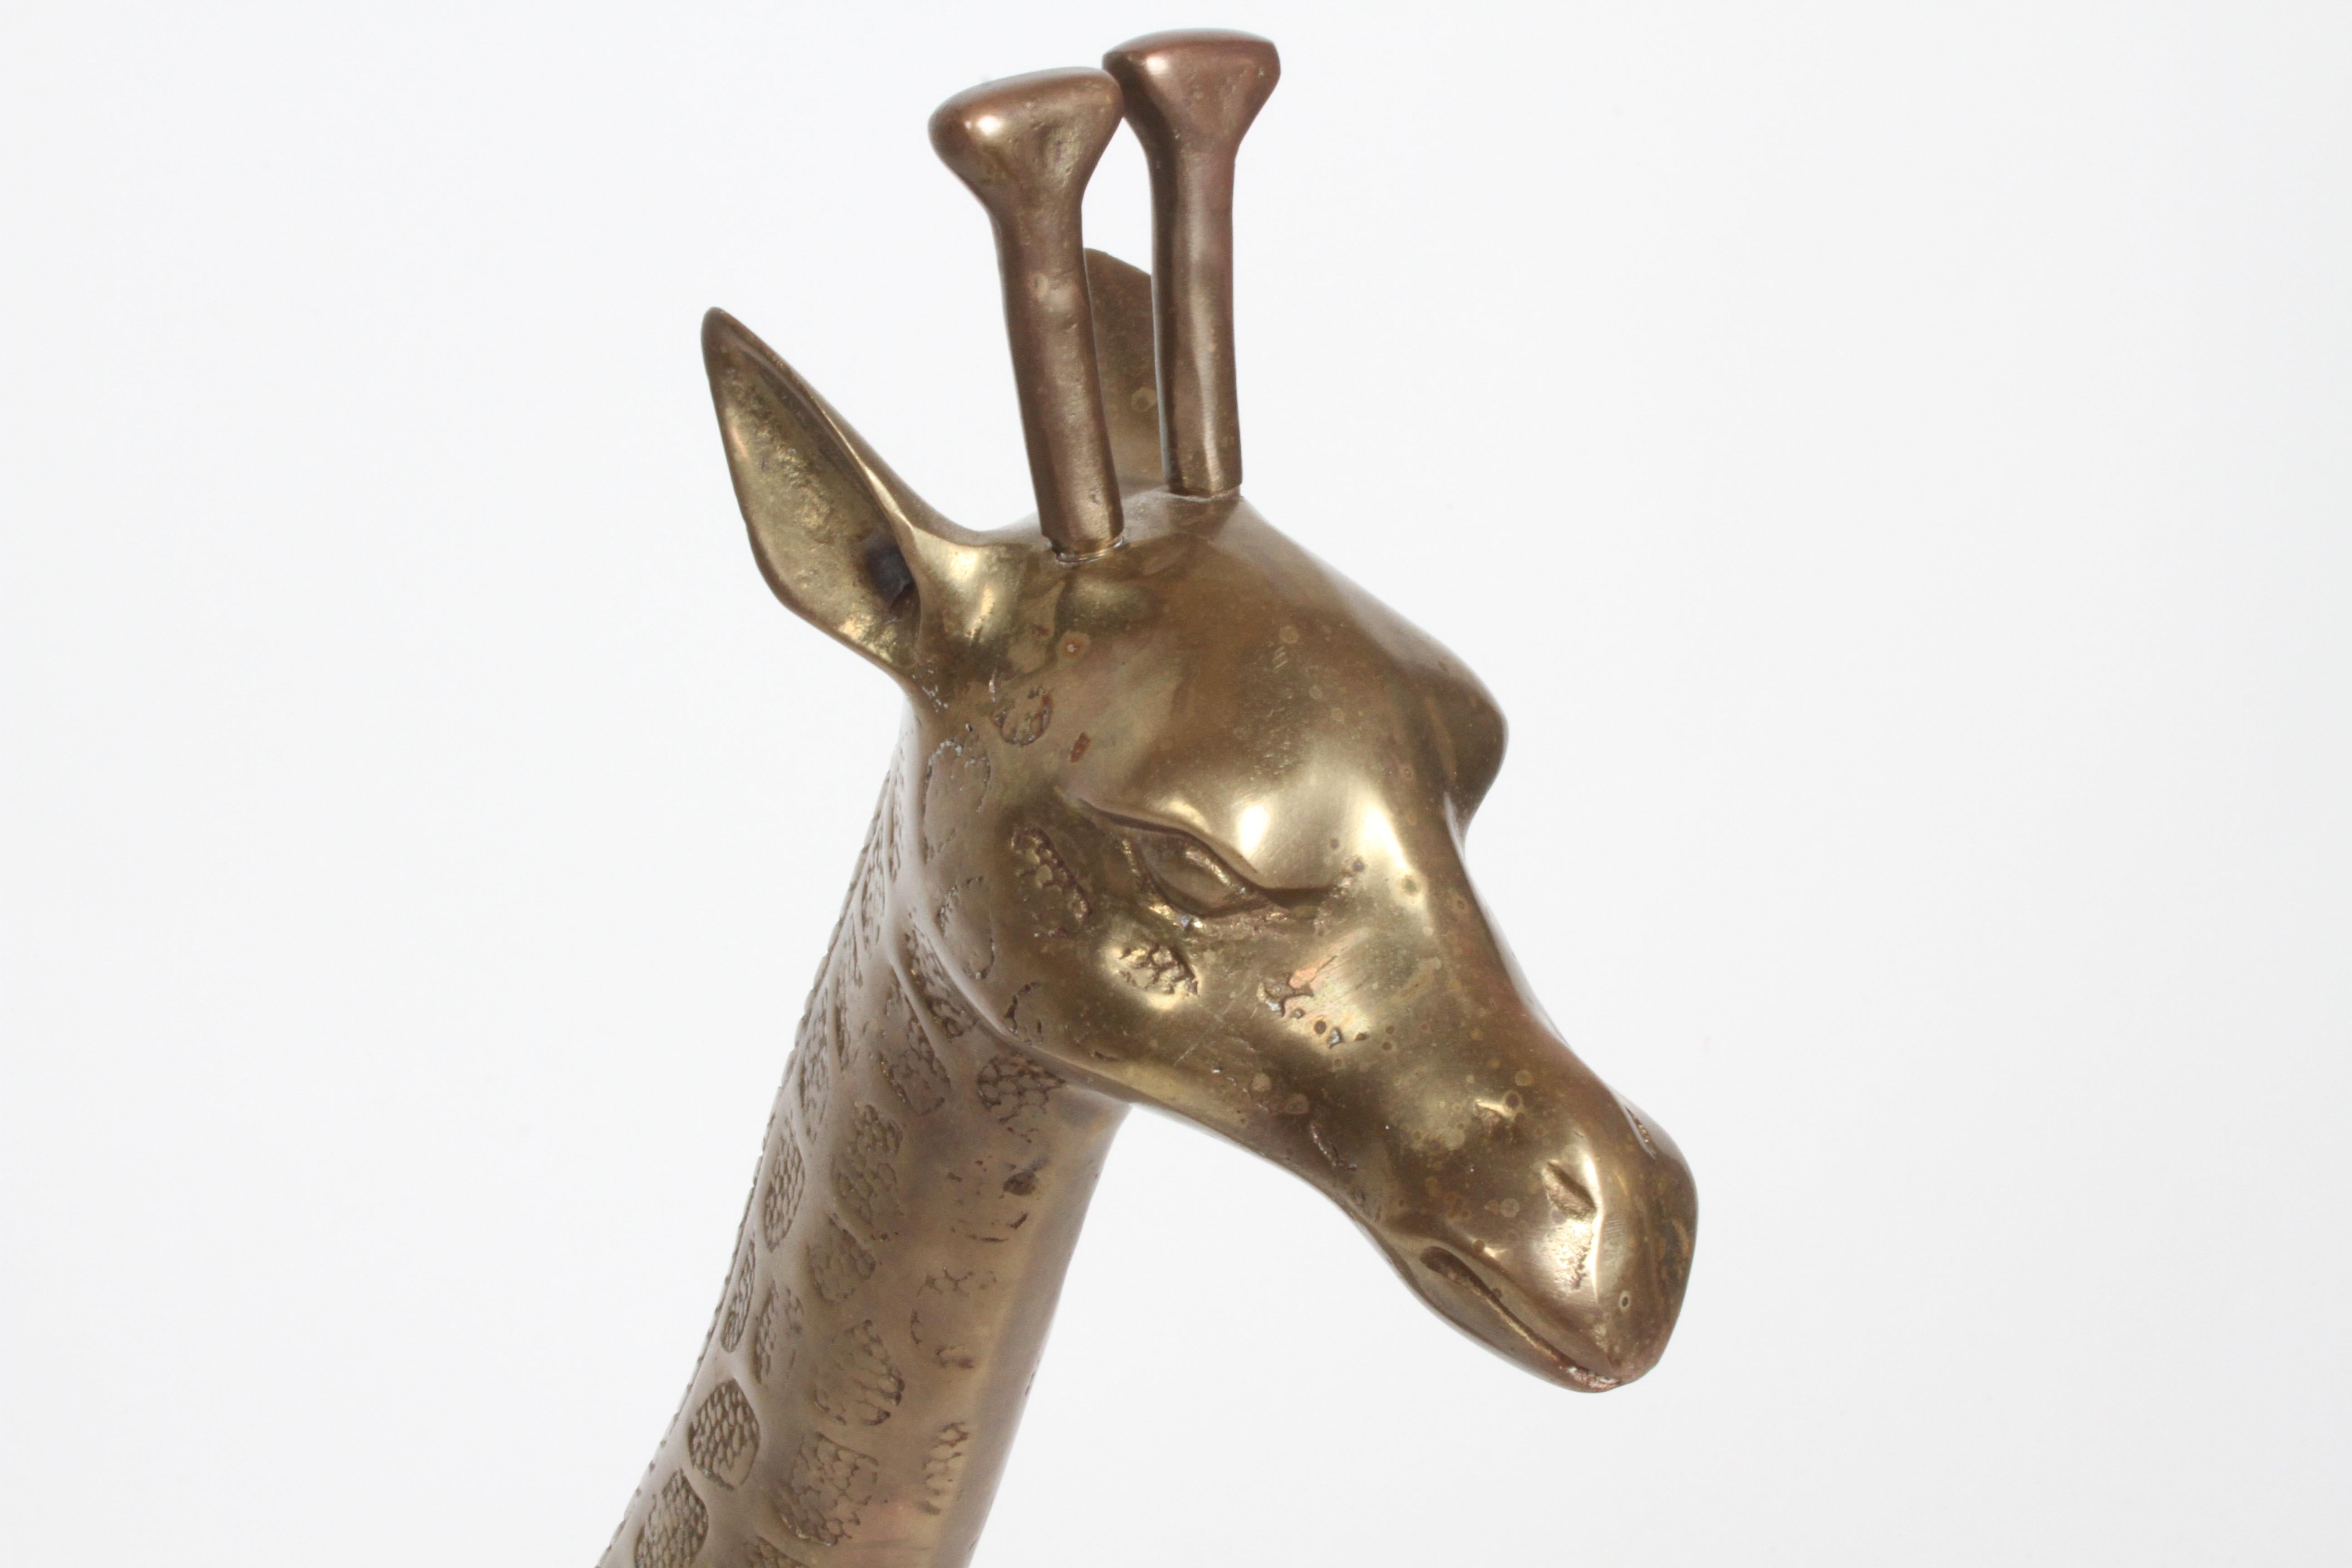 Hollywood Regency Style Brass Giraffe Floor Statue or Sculpture, circa 1970s For Sale 3